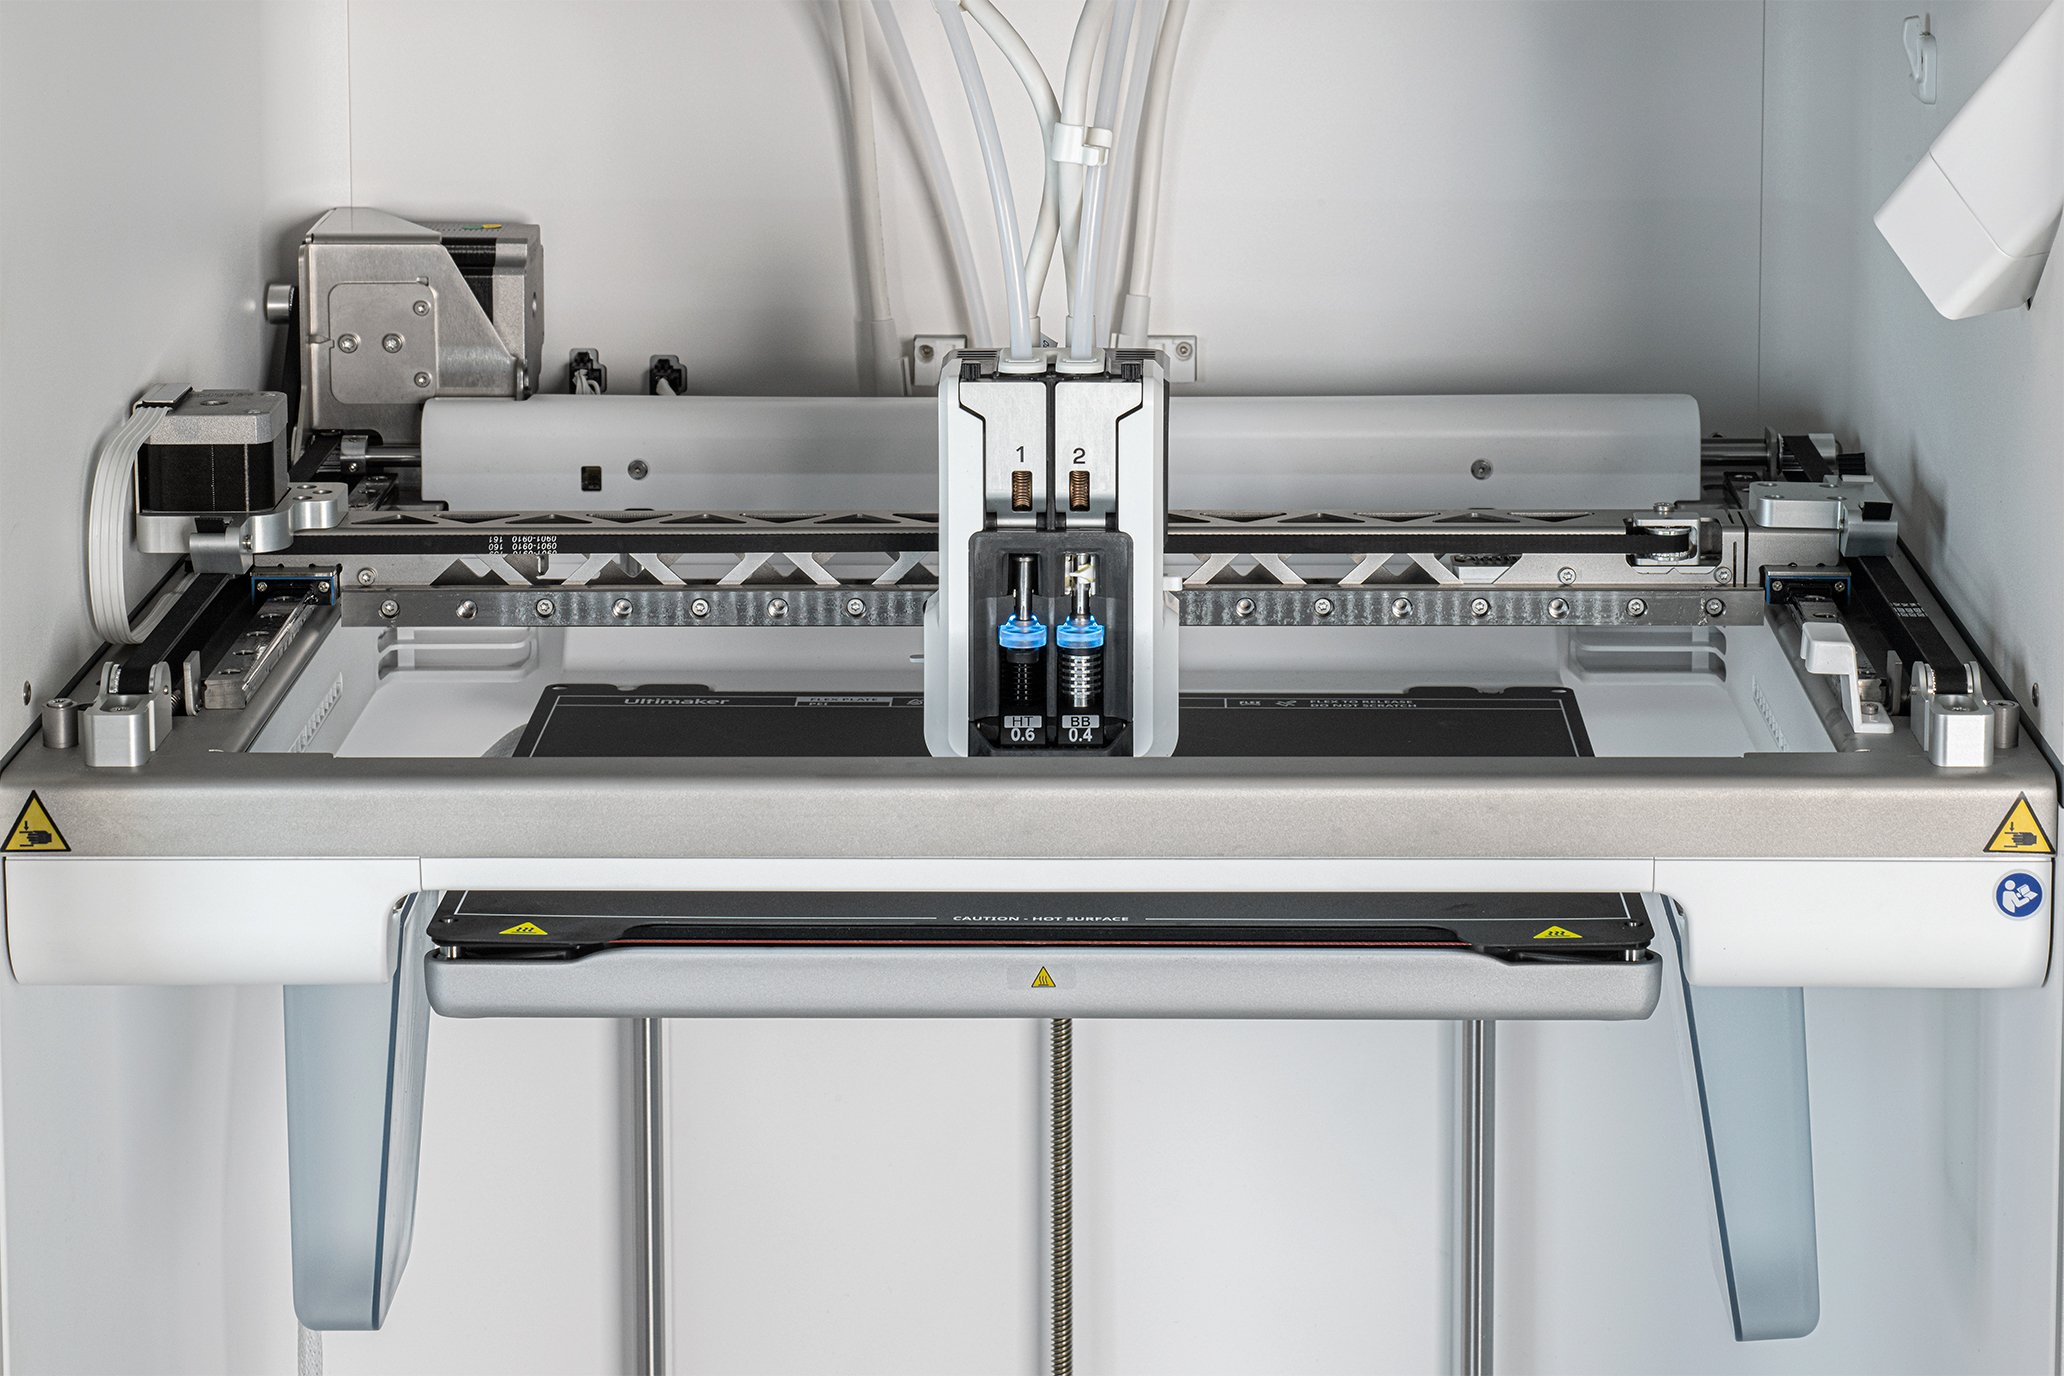 The UltiMaker Factor 4 features an H-bridge gantry and a stiff metal frame for speedy and precise printing